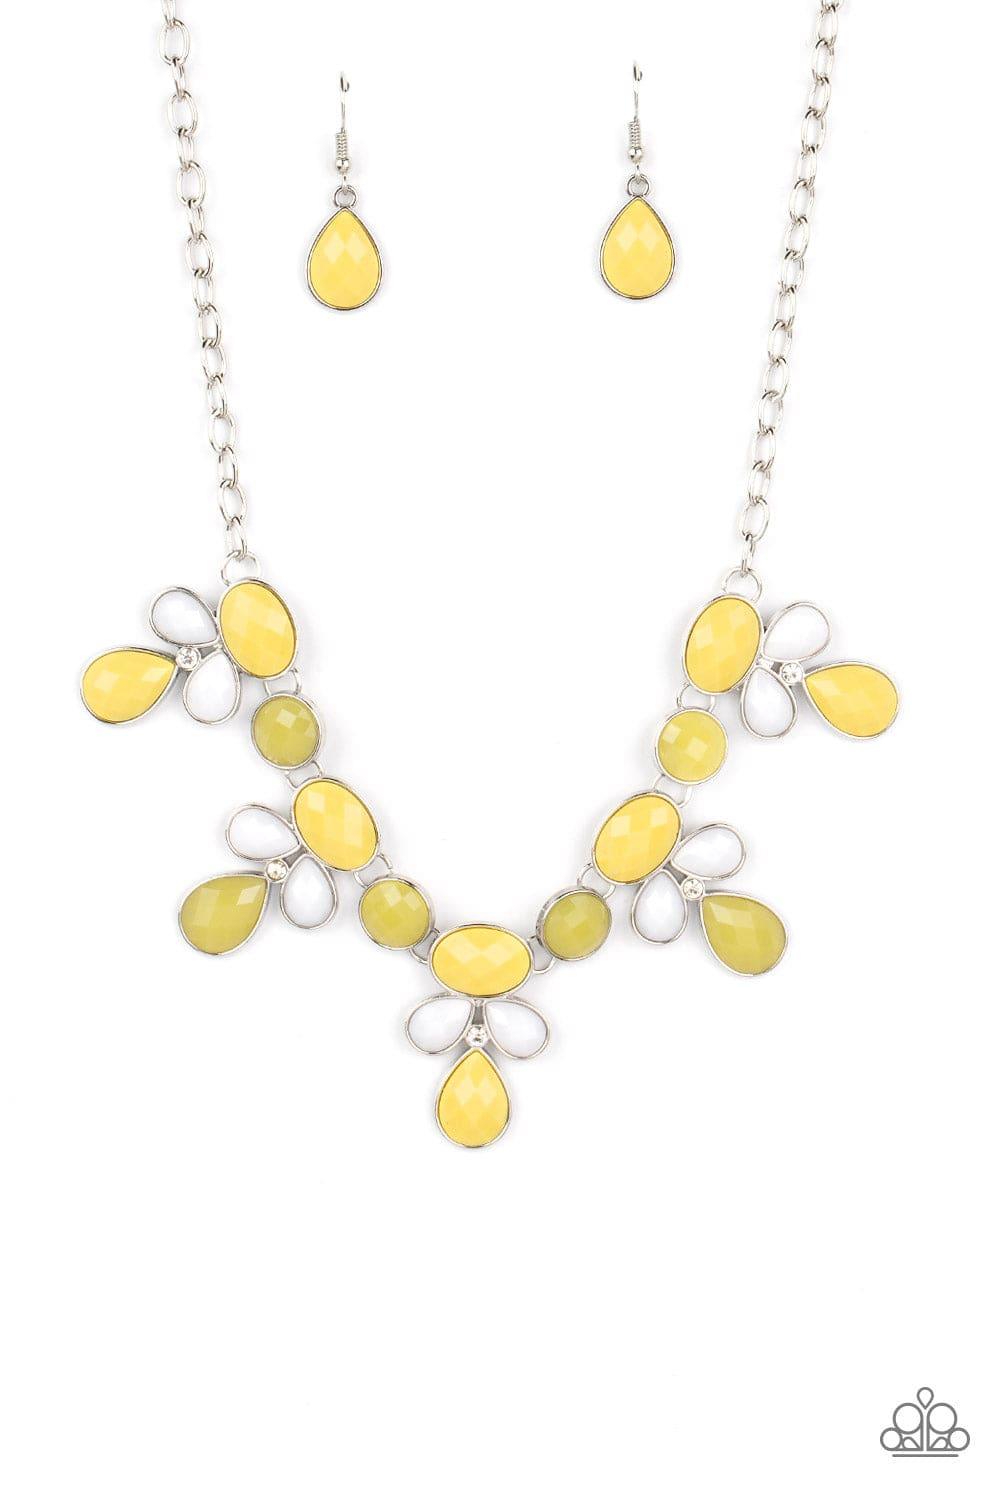 Paparazzi Accessories - Midsummer Meadow - Yellow Necklace - Bling by JessieK